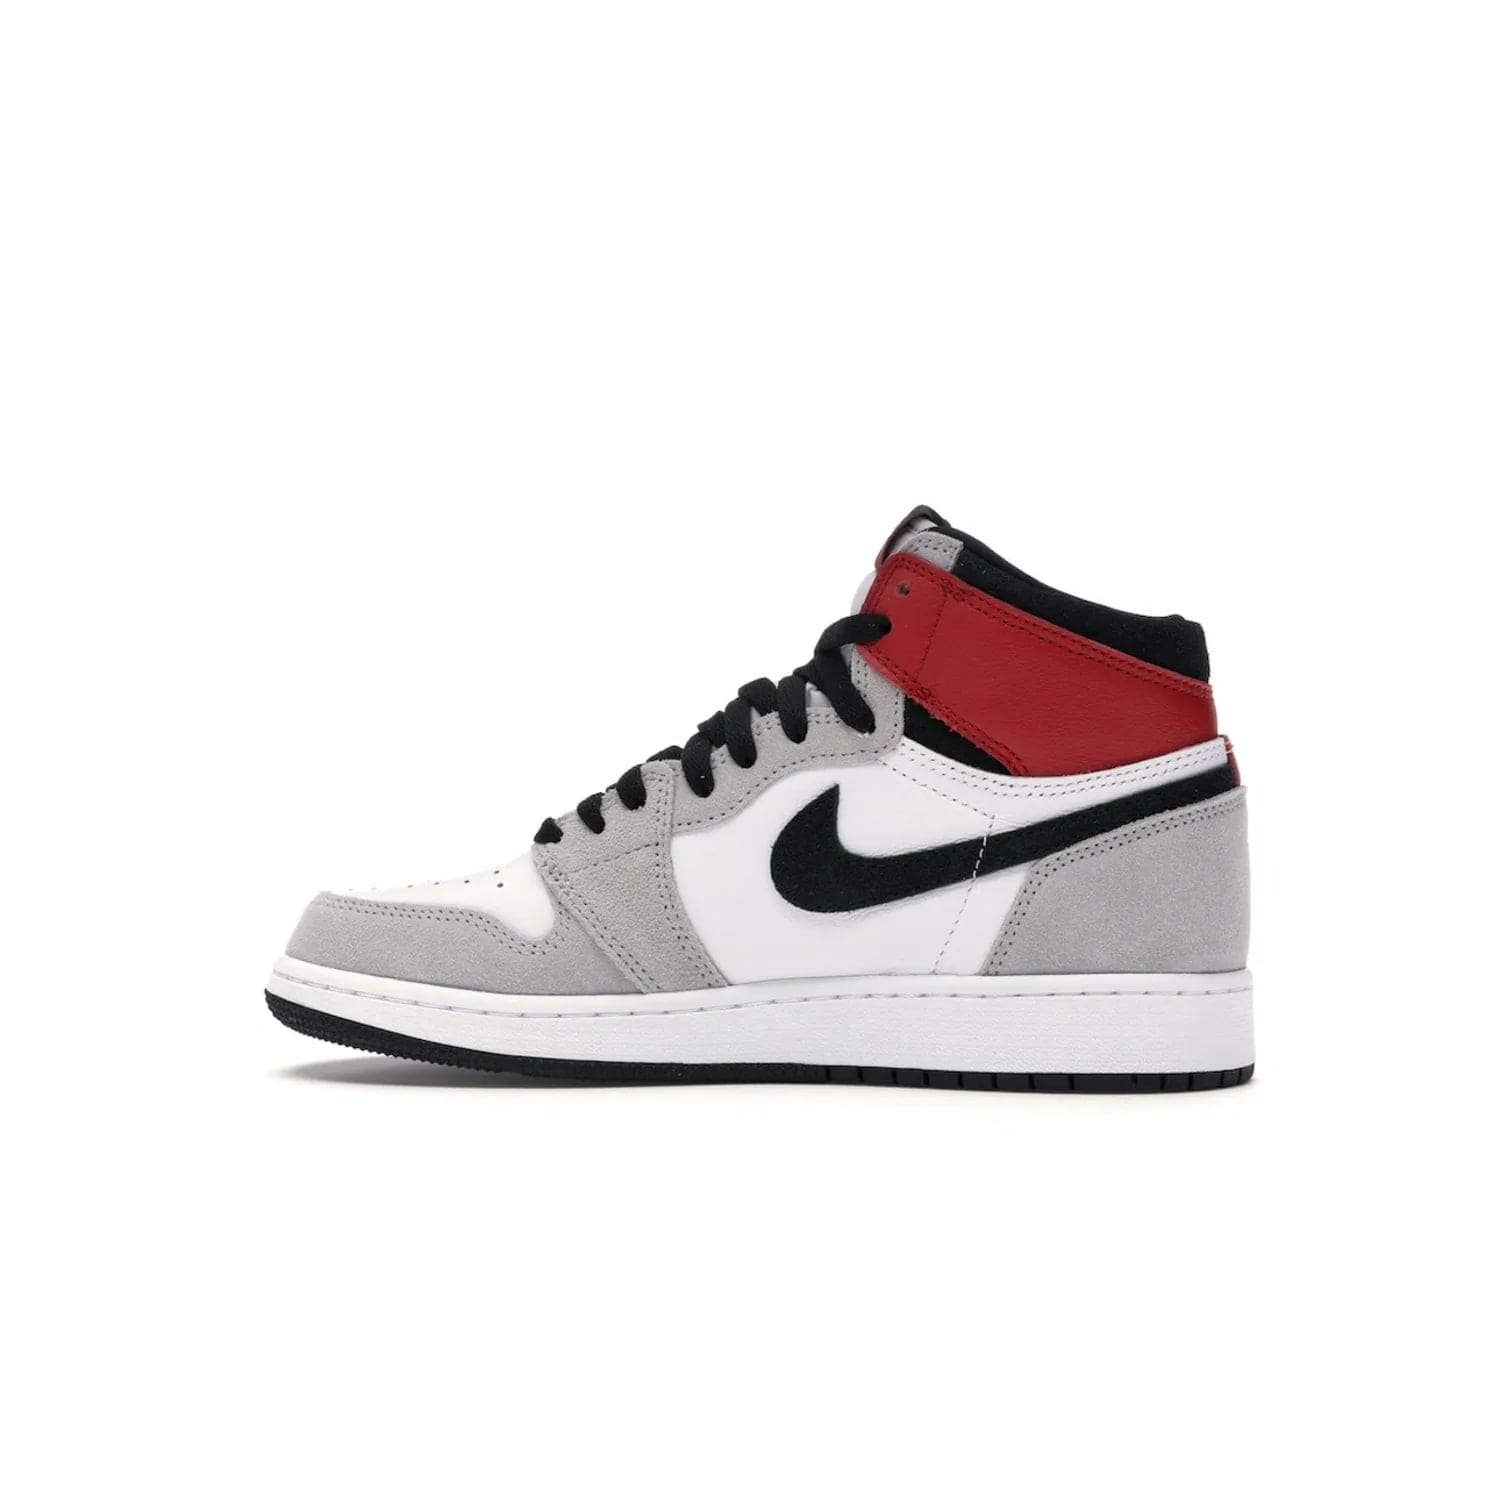 Jordan 1 Retro High Light Smoke Grey (GS) - Image 20 - Only at www.BallersClubKickz.com - Jordan 1 Retro High Light Smoke Grey (GS) features shades of grey, black, and Varsity Red with a bold silhouette. Premium white leather and suede overlays create a unique look. Released July 2020, offering style and performance. Perfect sneaker for any collector or fan.